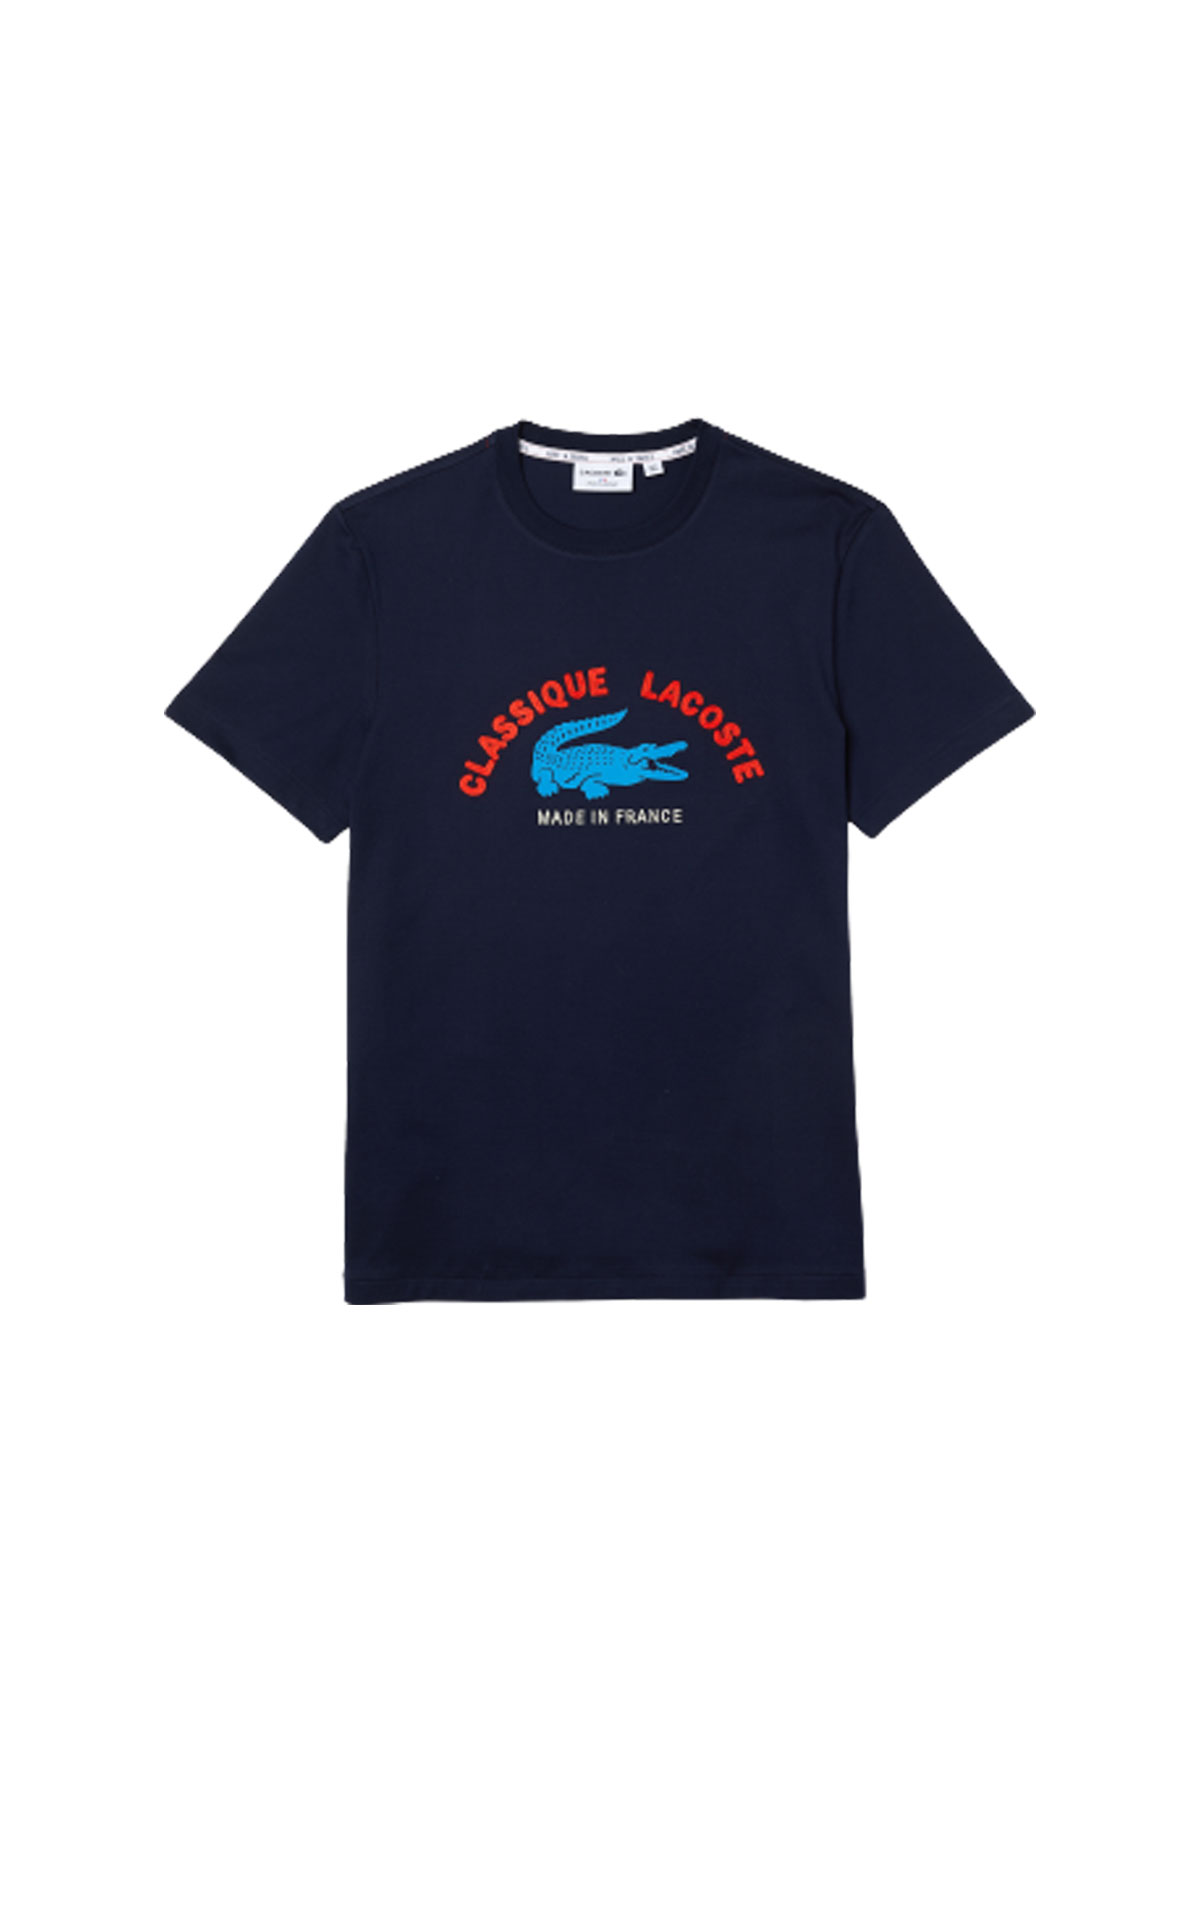 Lacoste Organic cotton t-shirt navy from Bicester Village